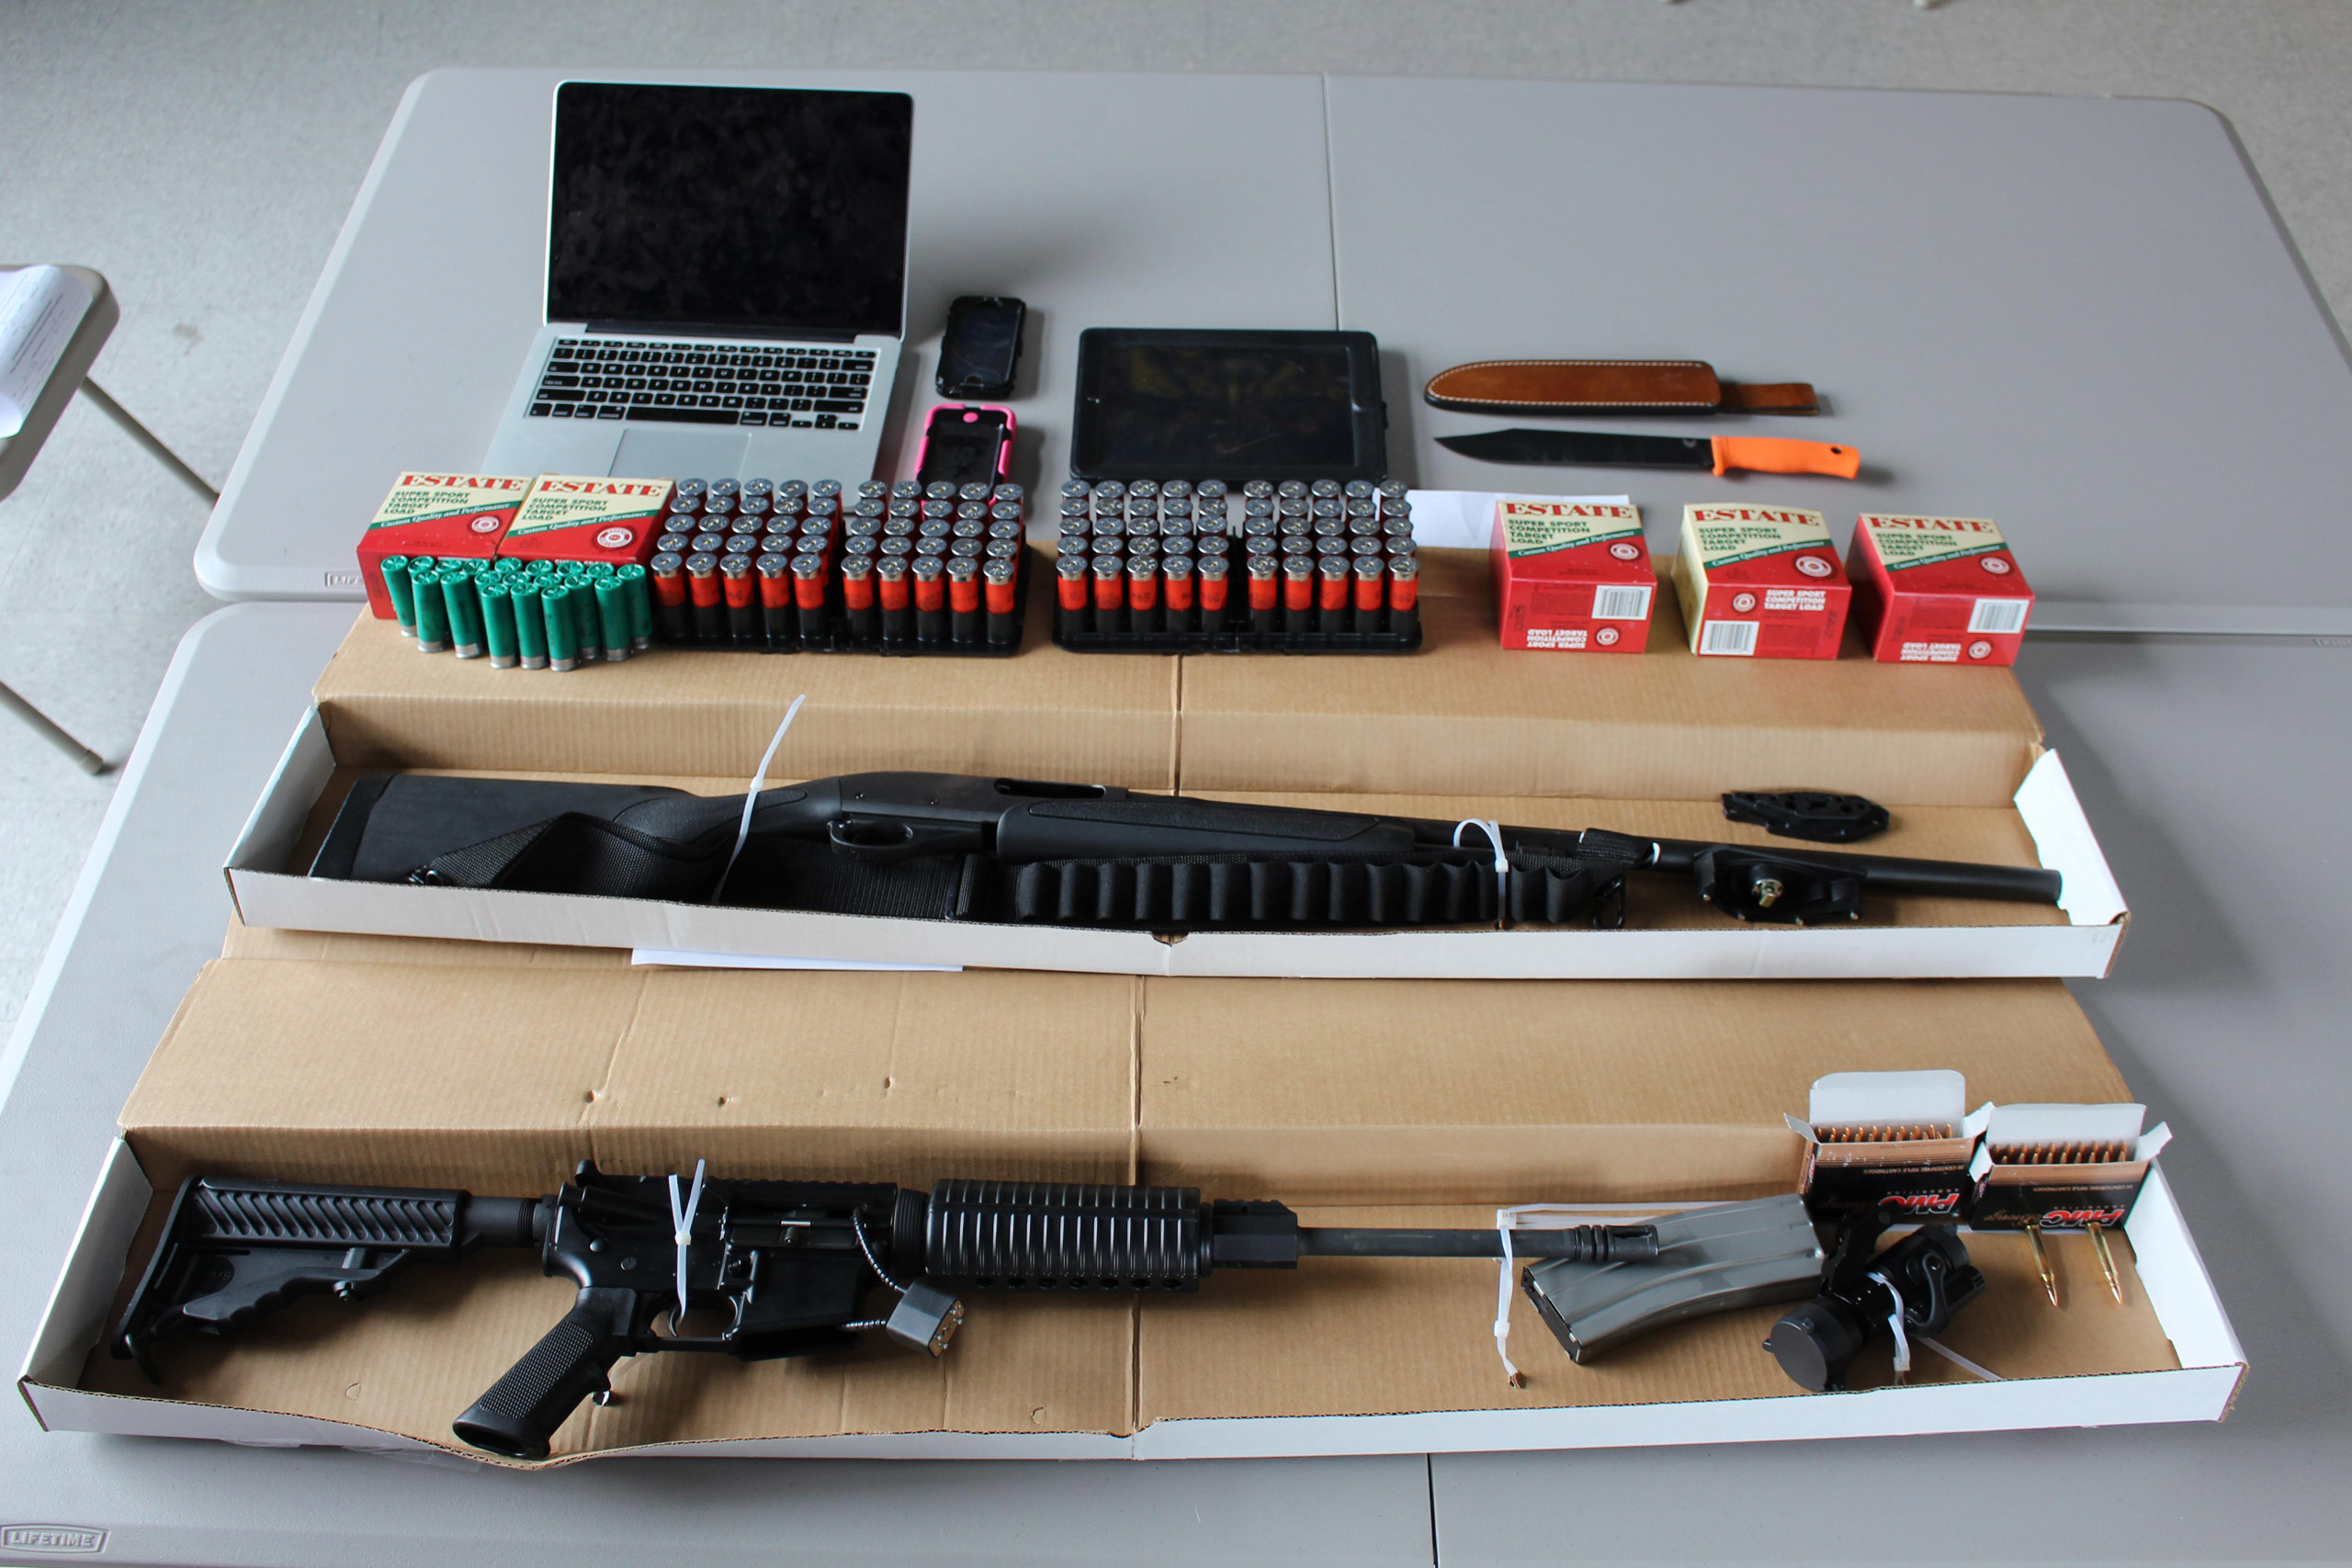 This photo, provided by the Boston Police Department, shows a 12-gauge Remington shotgun, a DPM5 Model AR-15 rifle, several hundred rounds of ammunition, and a hunting knife, confiscated by the police in Boston on Aug. 21, 2015. (Boston Police Department)